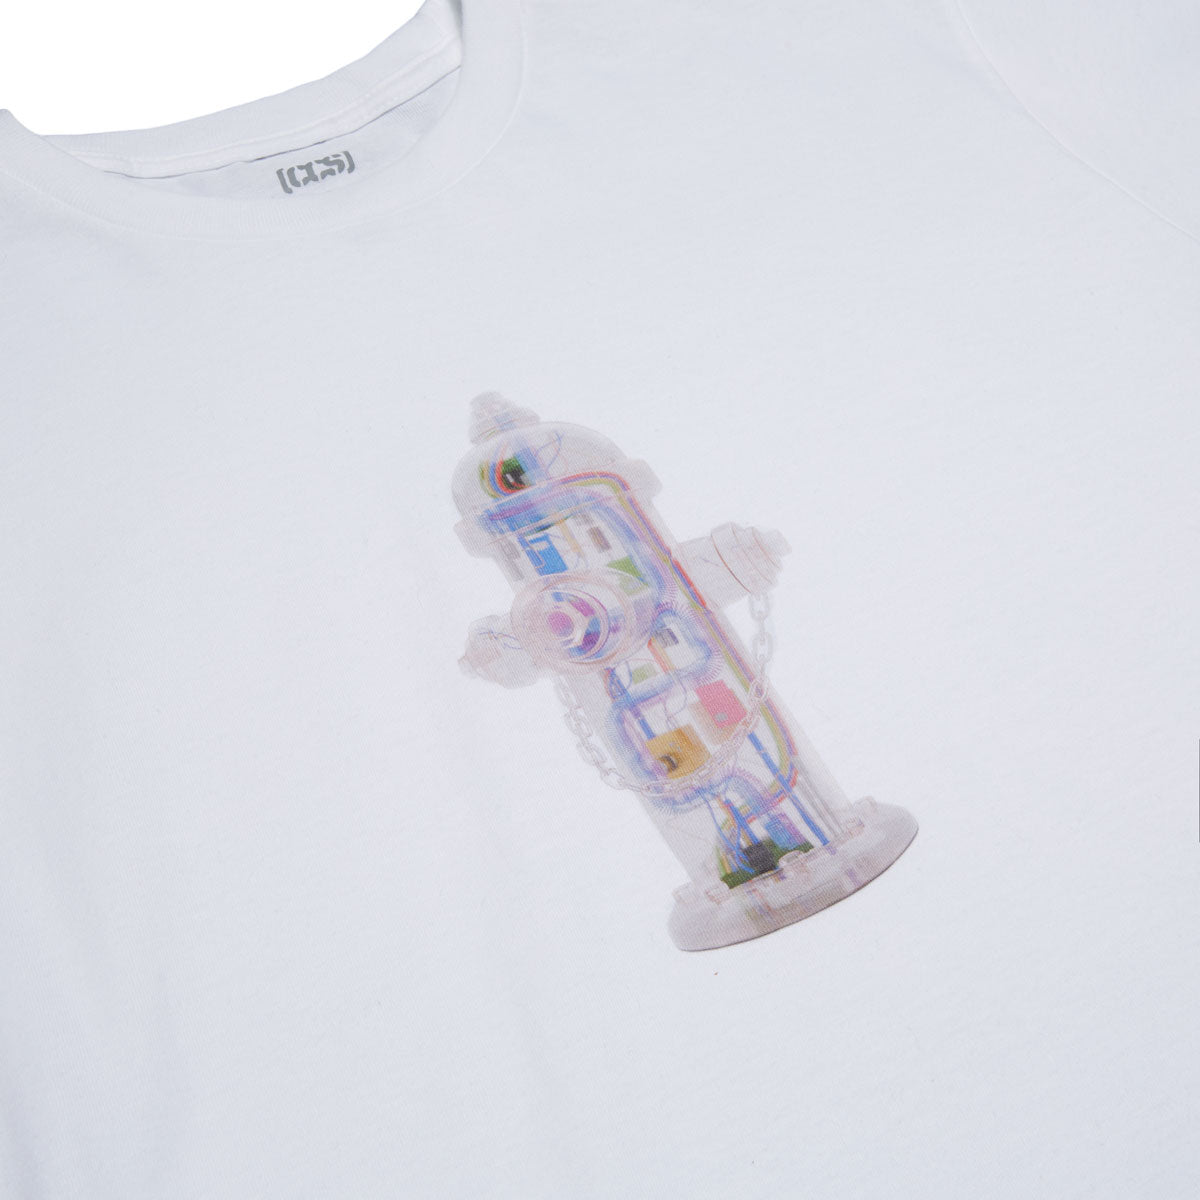 CCS Going Clear Hydrant T-Shirt - White image 2